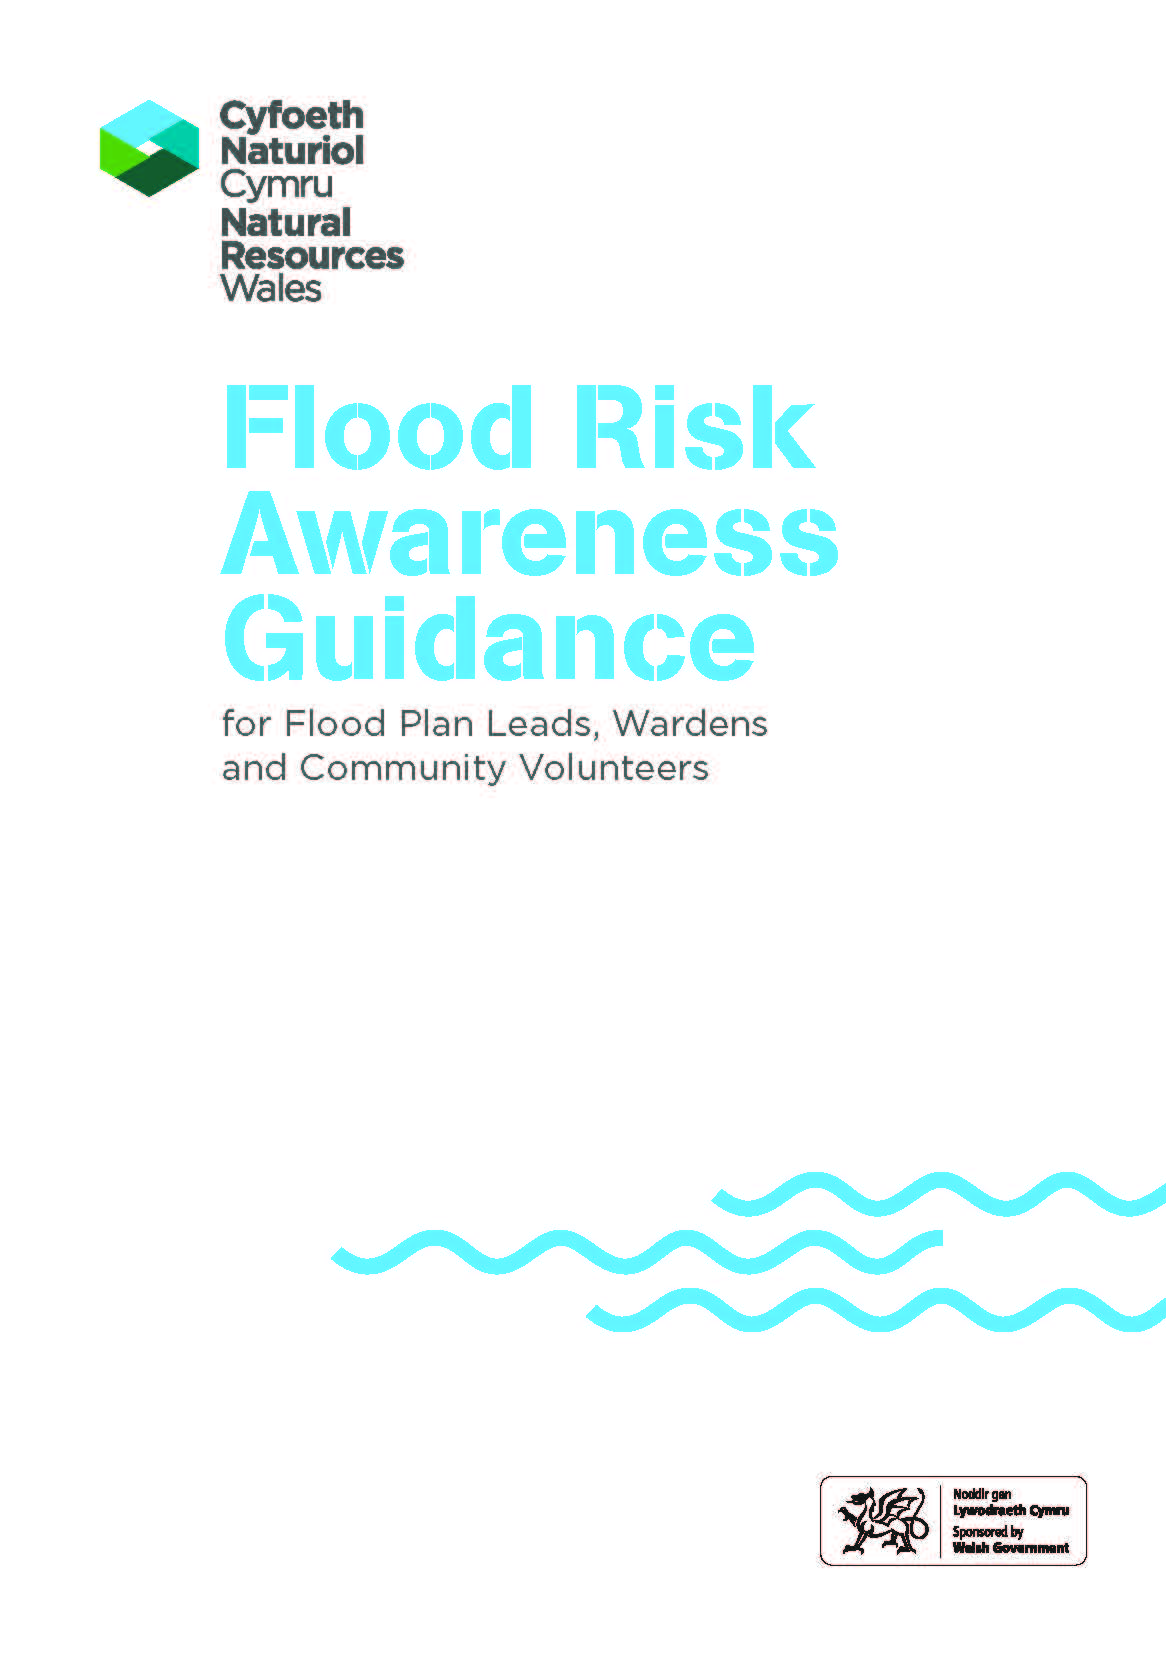 Image of front page of Flood Risk Awareness Guidance